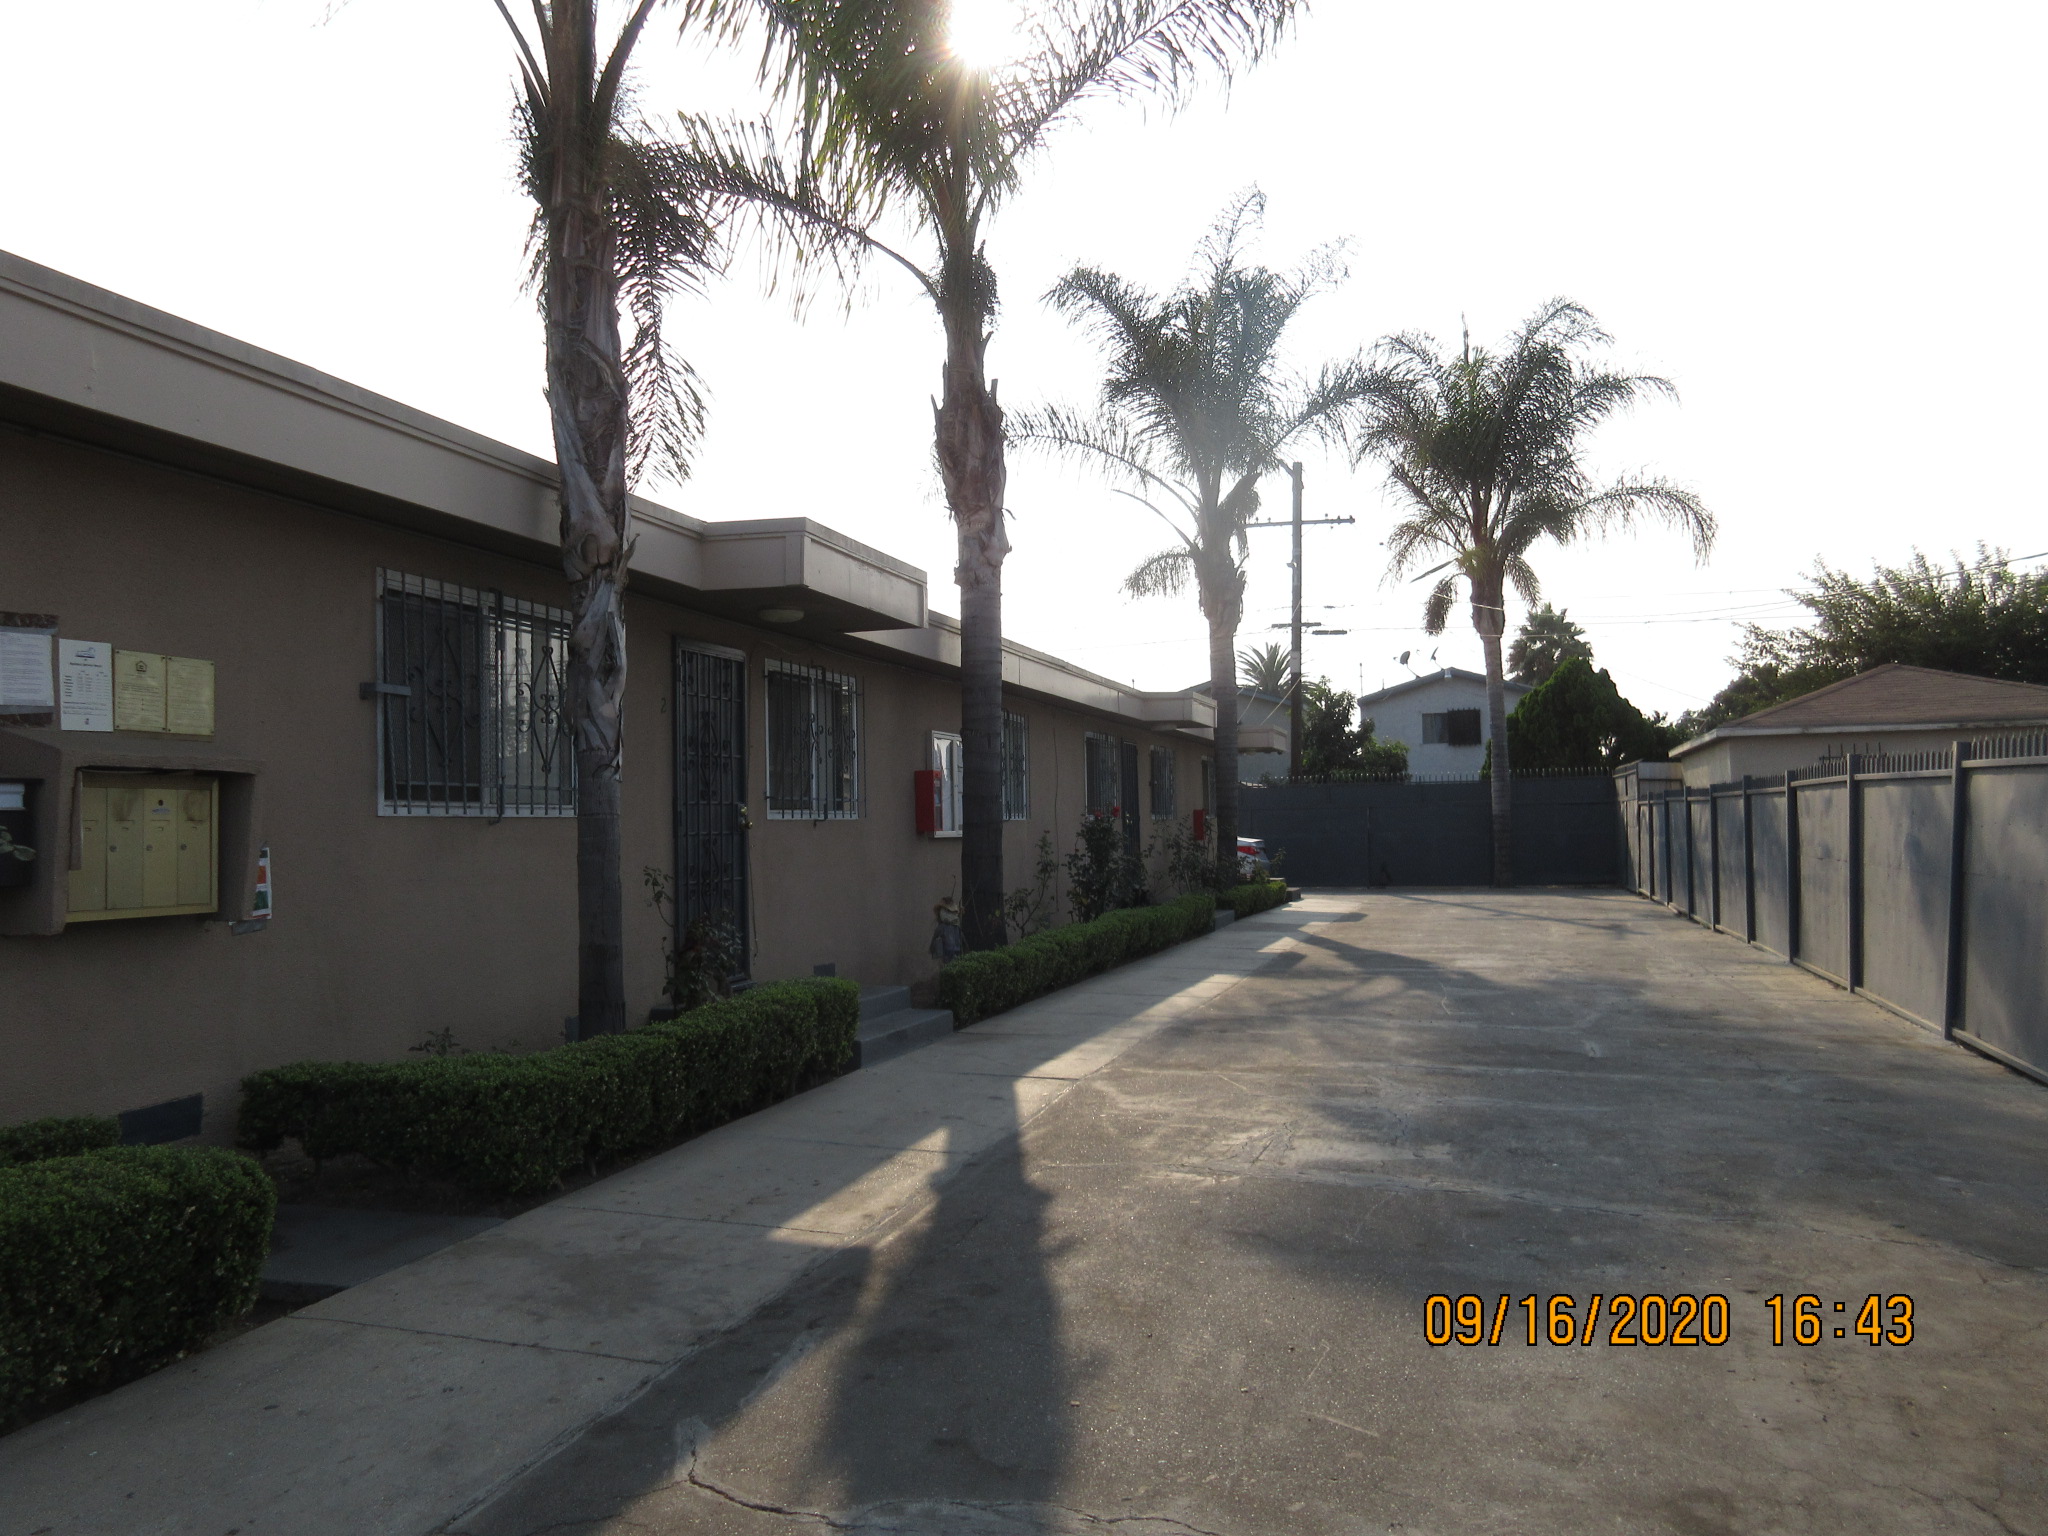 Outside view of a complex. There are mailboxes on the side with posted signs on top. Entry way to a couple of units are visible. There are small hedges in front of the units and trees. Windows have iron bars and doors have iron screens.